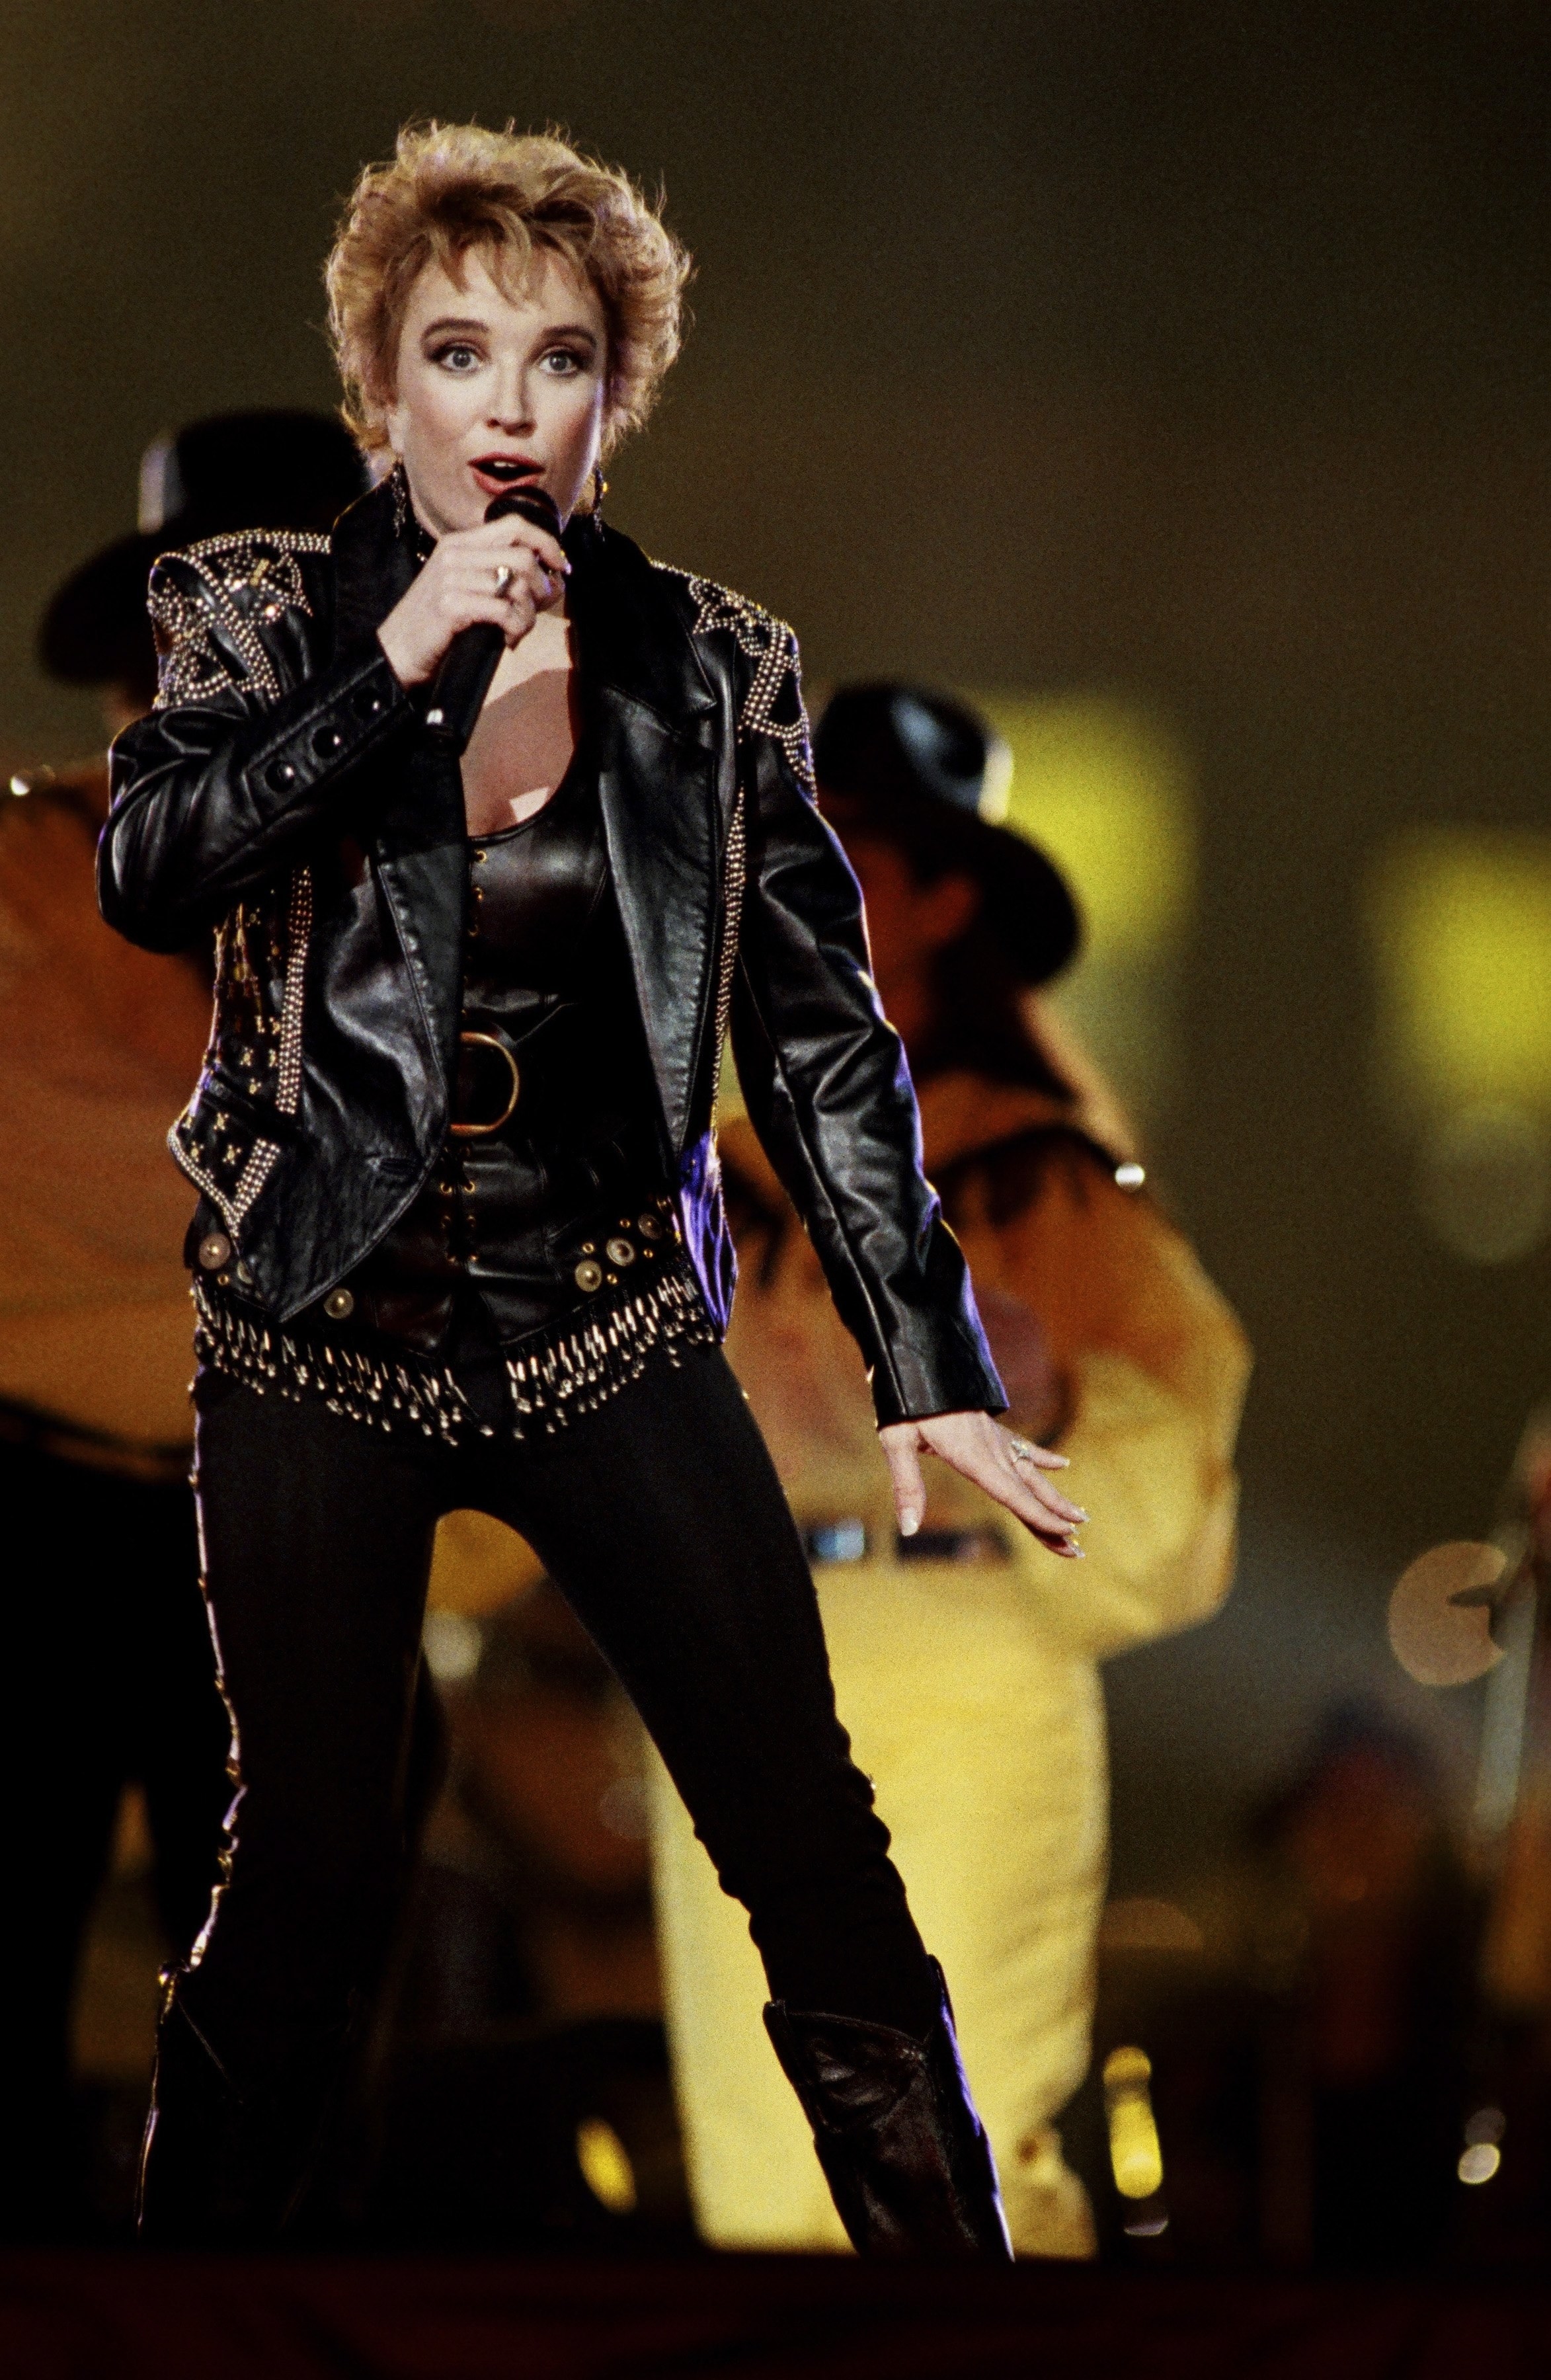 Country singer Tanya Tucker performs during the half-time show at the 1994 Atlanta, Georgia, Superbowl XXVII